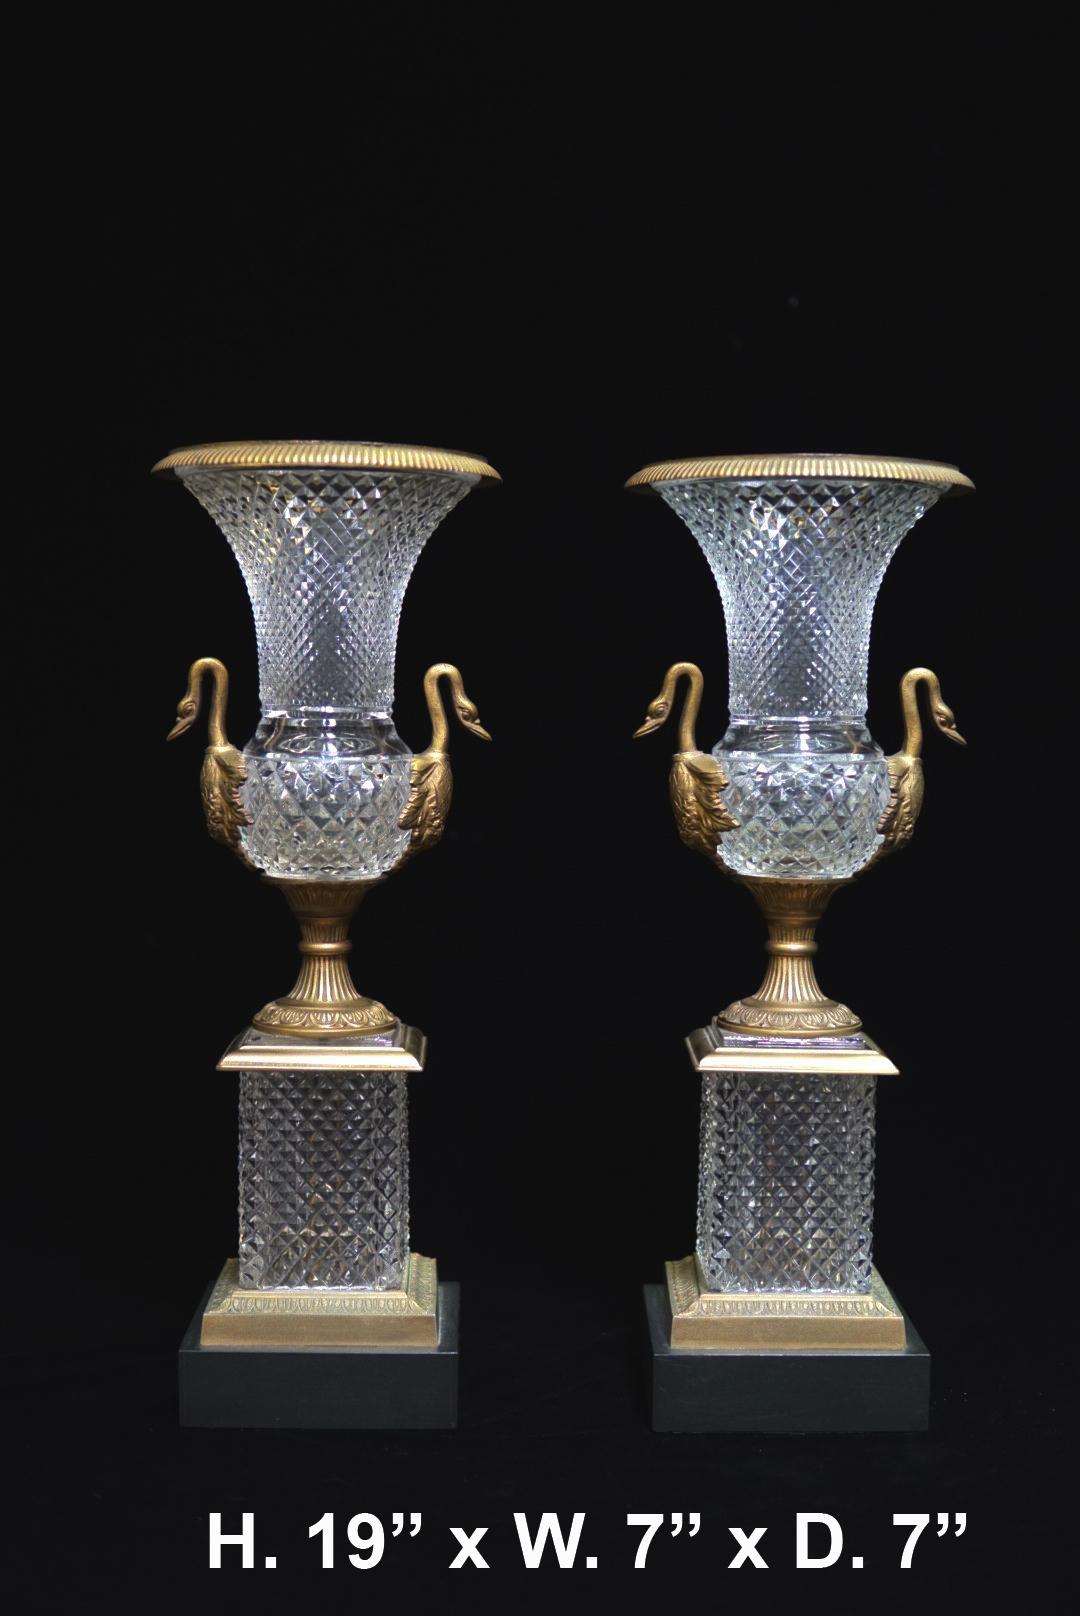 Impressive pair of French Louis XVI style ormolu mounted cut crystal urns with swan handles. Each urn is surmounted with a reeded gilt bronze rim over a cut crystal body flanked by two swans heads, above a square base and raised on bronze base.